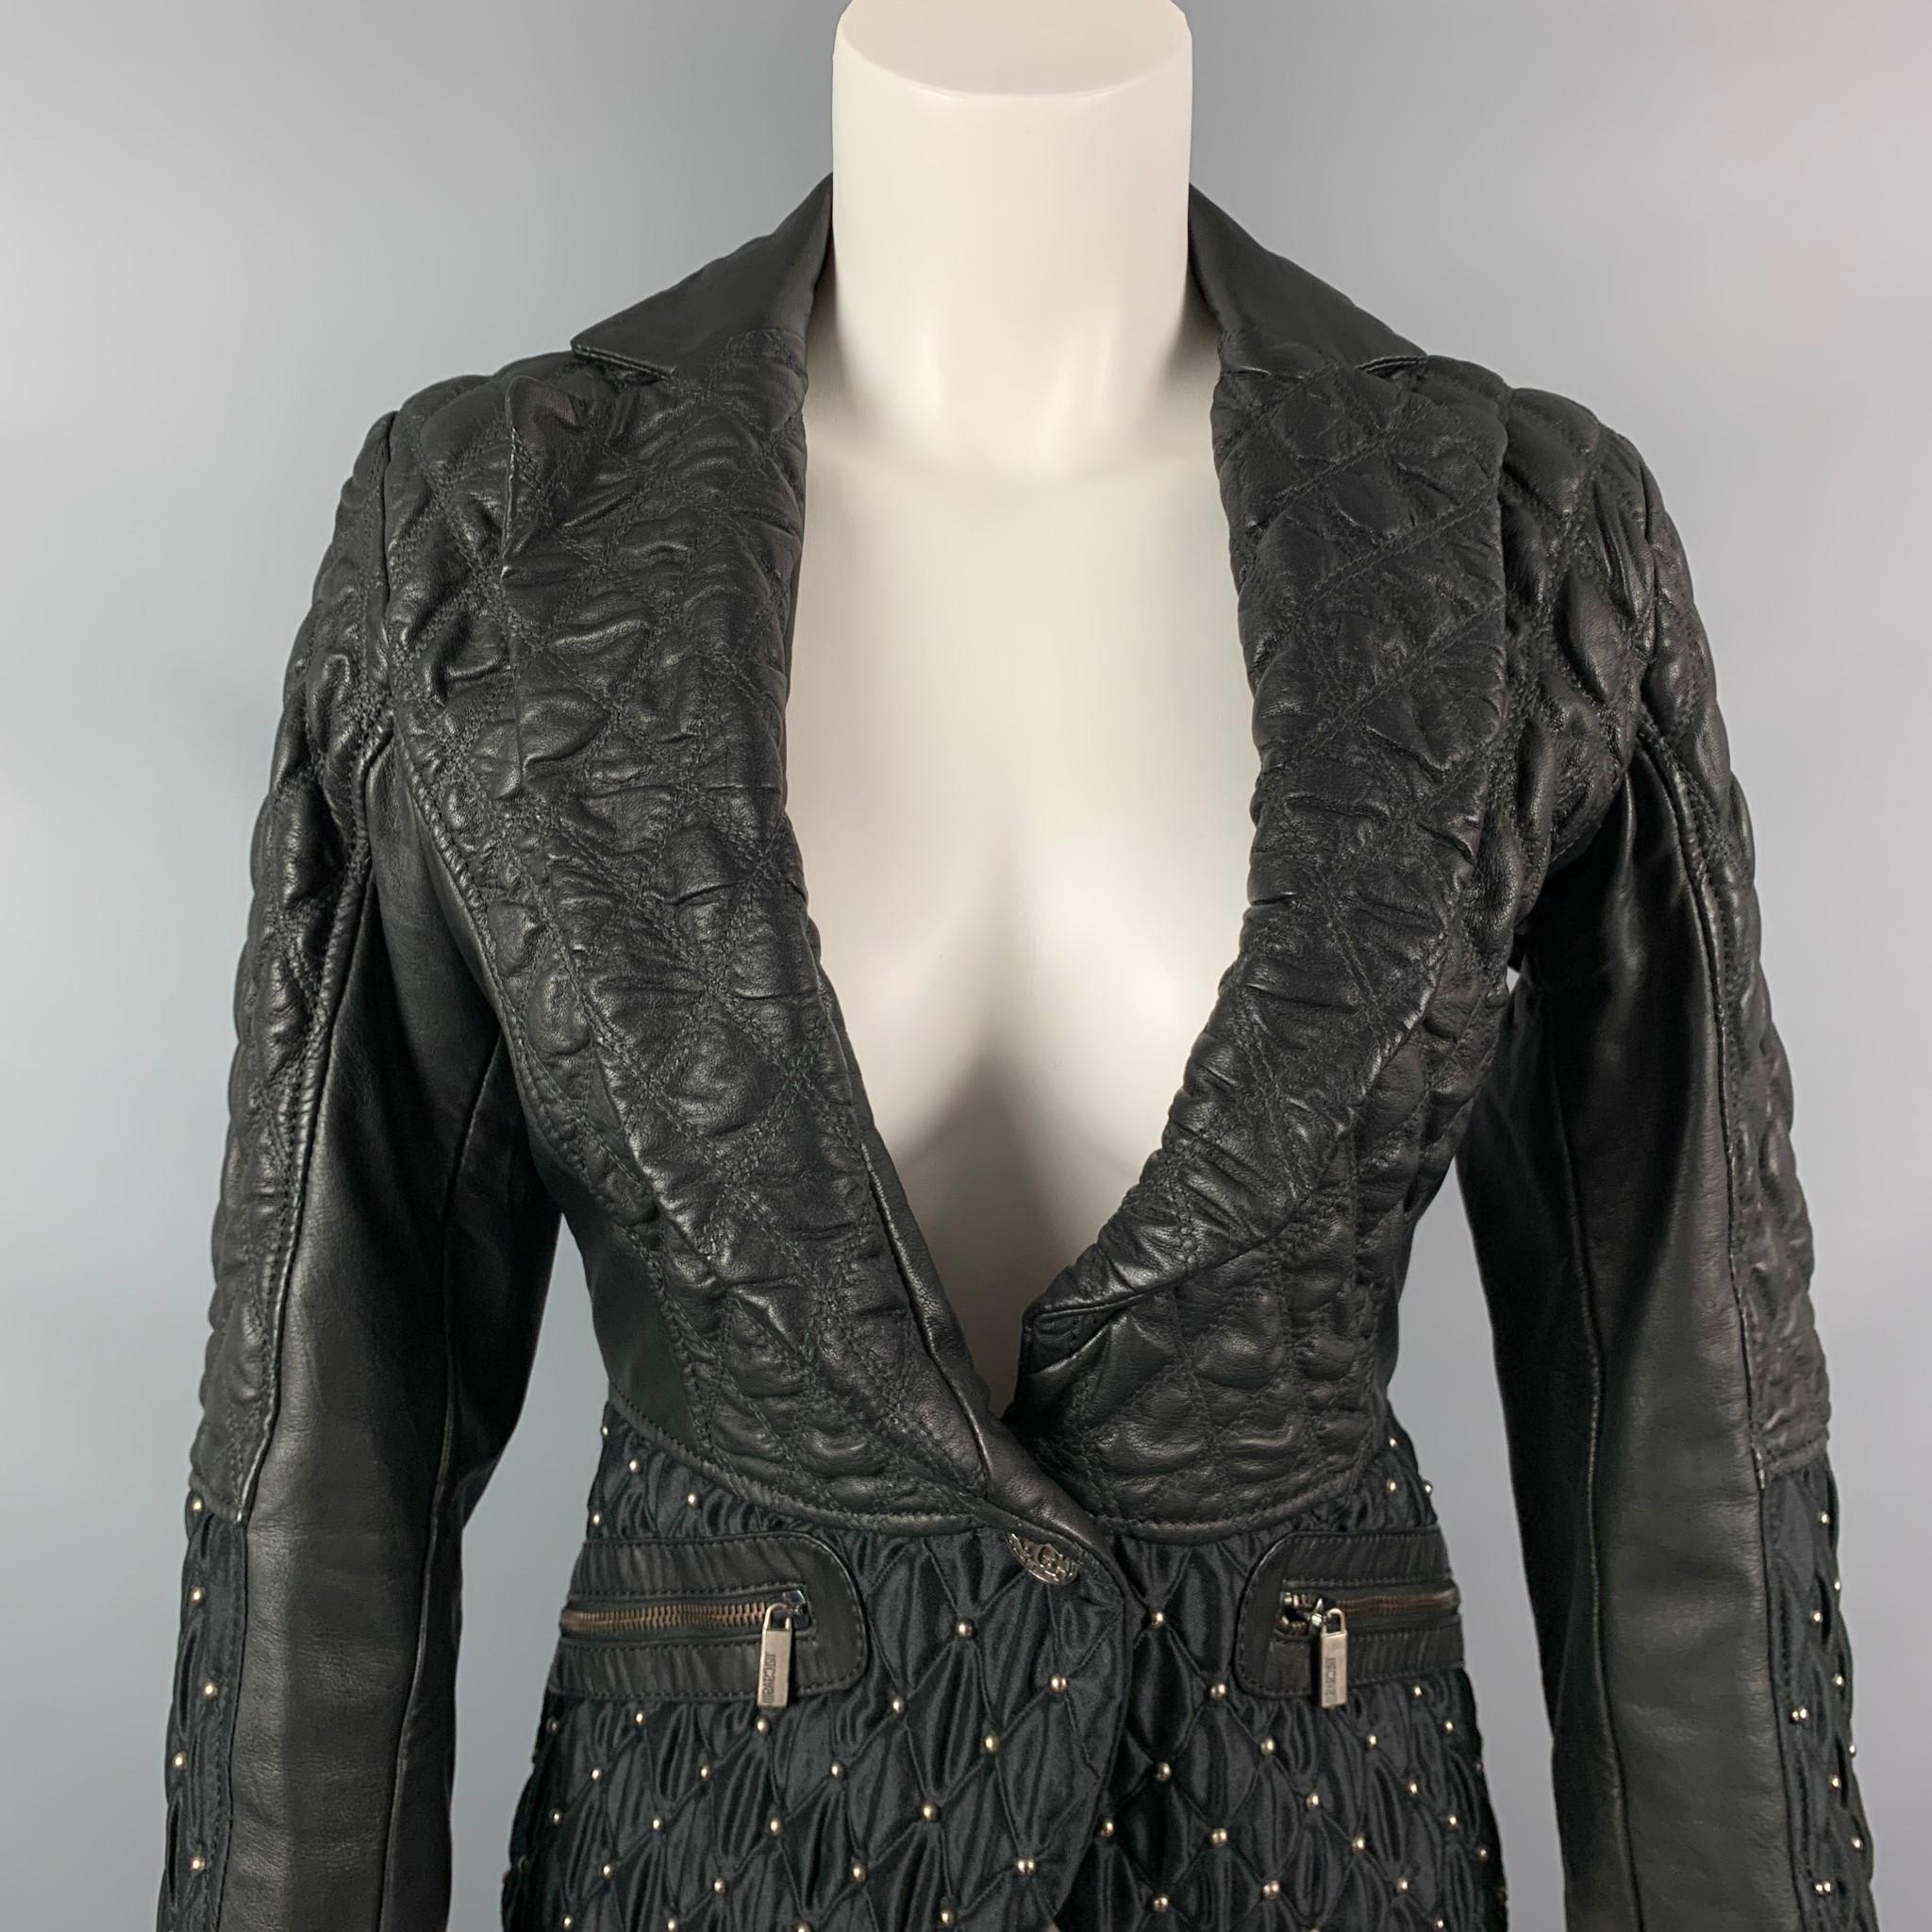 JUST CAVALLI jacket comes in a black quilted acetate / viscose with a full liner featuring a shawl collar, studded details, a-line, zipper pockets, and a single button closure. 

Very Good Pre-Owned Condition.
Marked: 40
Original Retail Price: